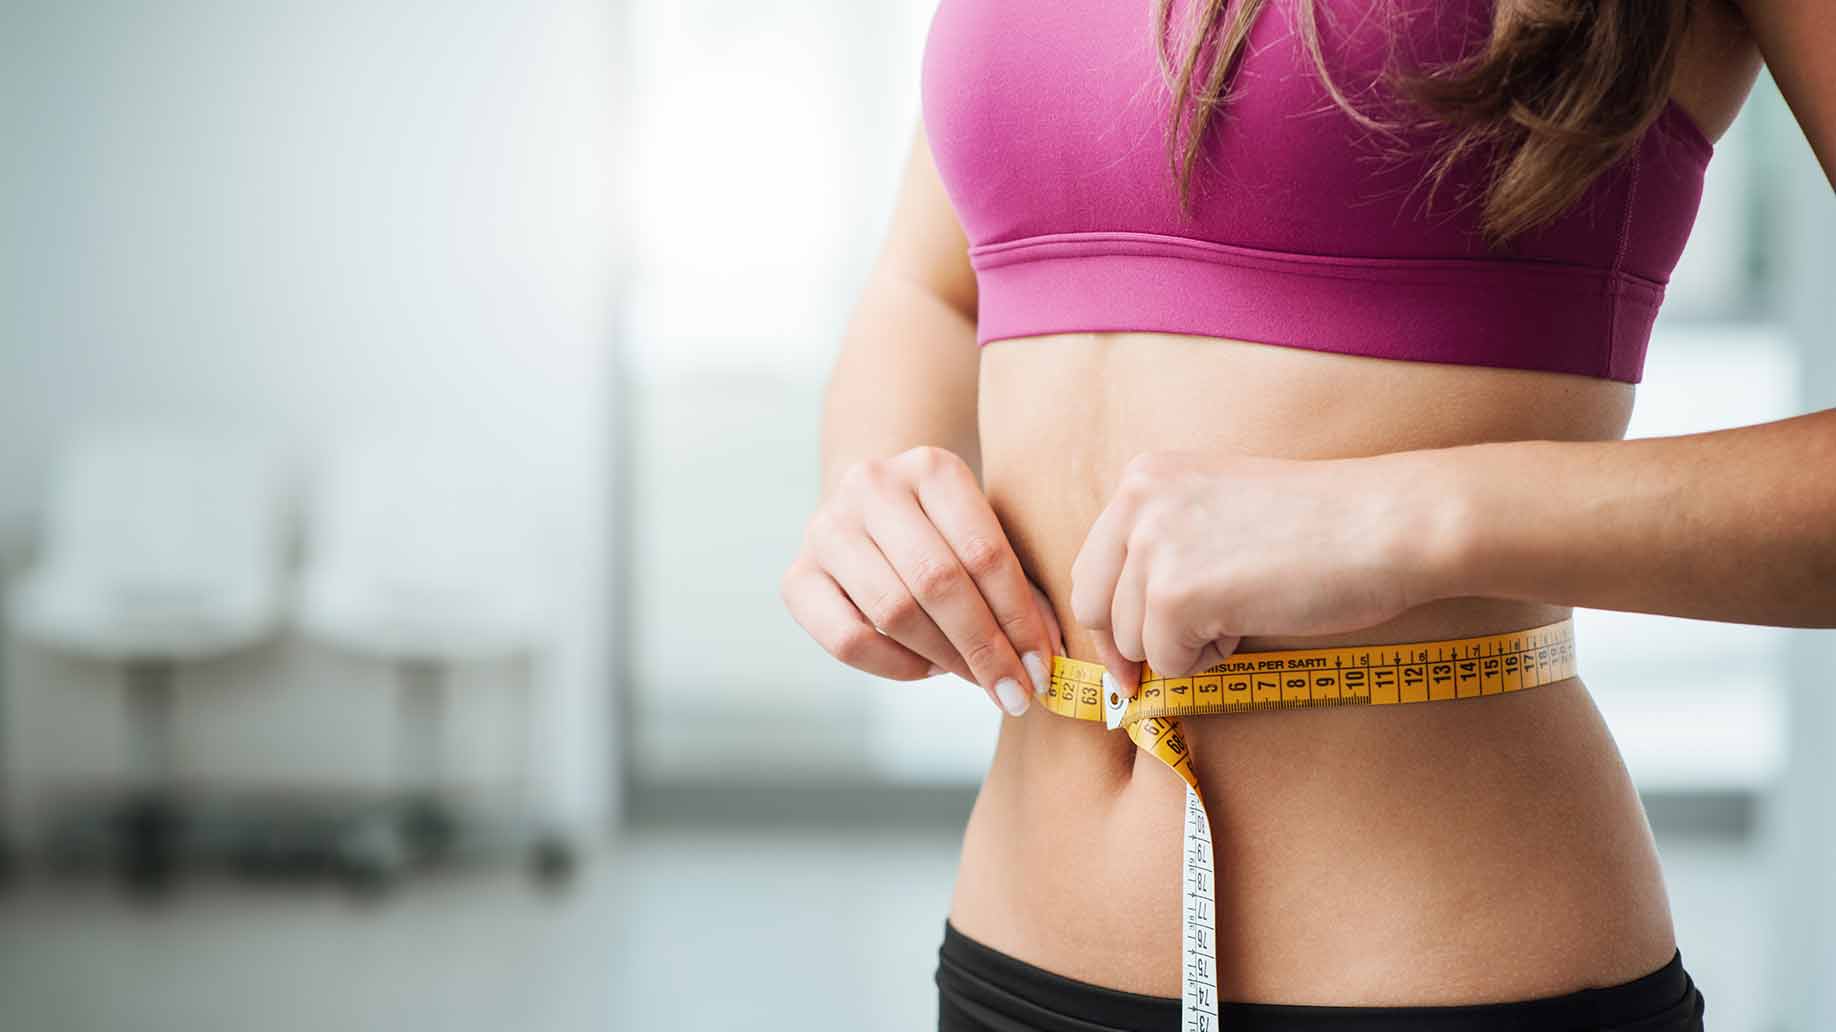 How To Balance Weight Loss And Body Shaping Routines